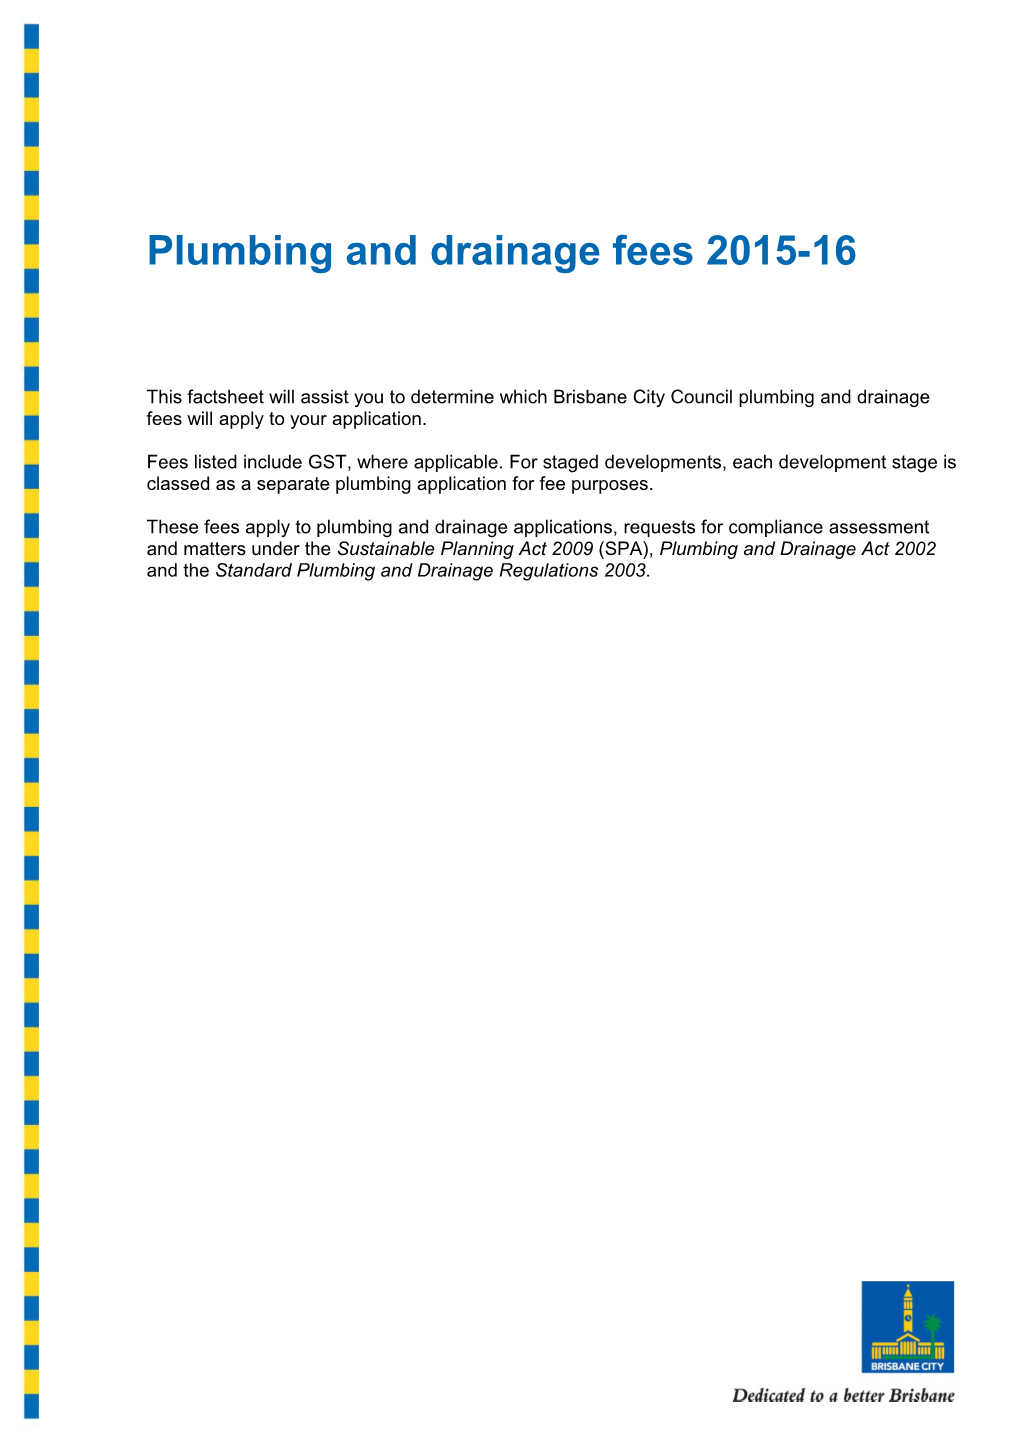 Plumbing and Drainage Fees 2015-16